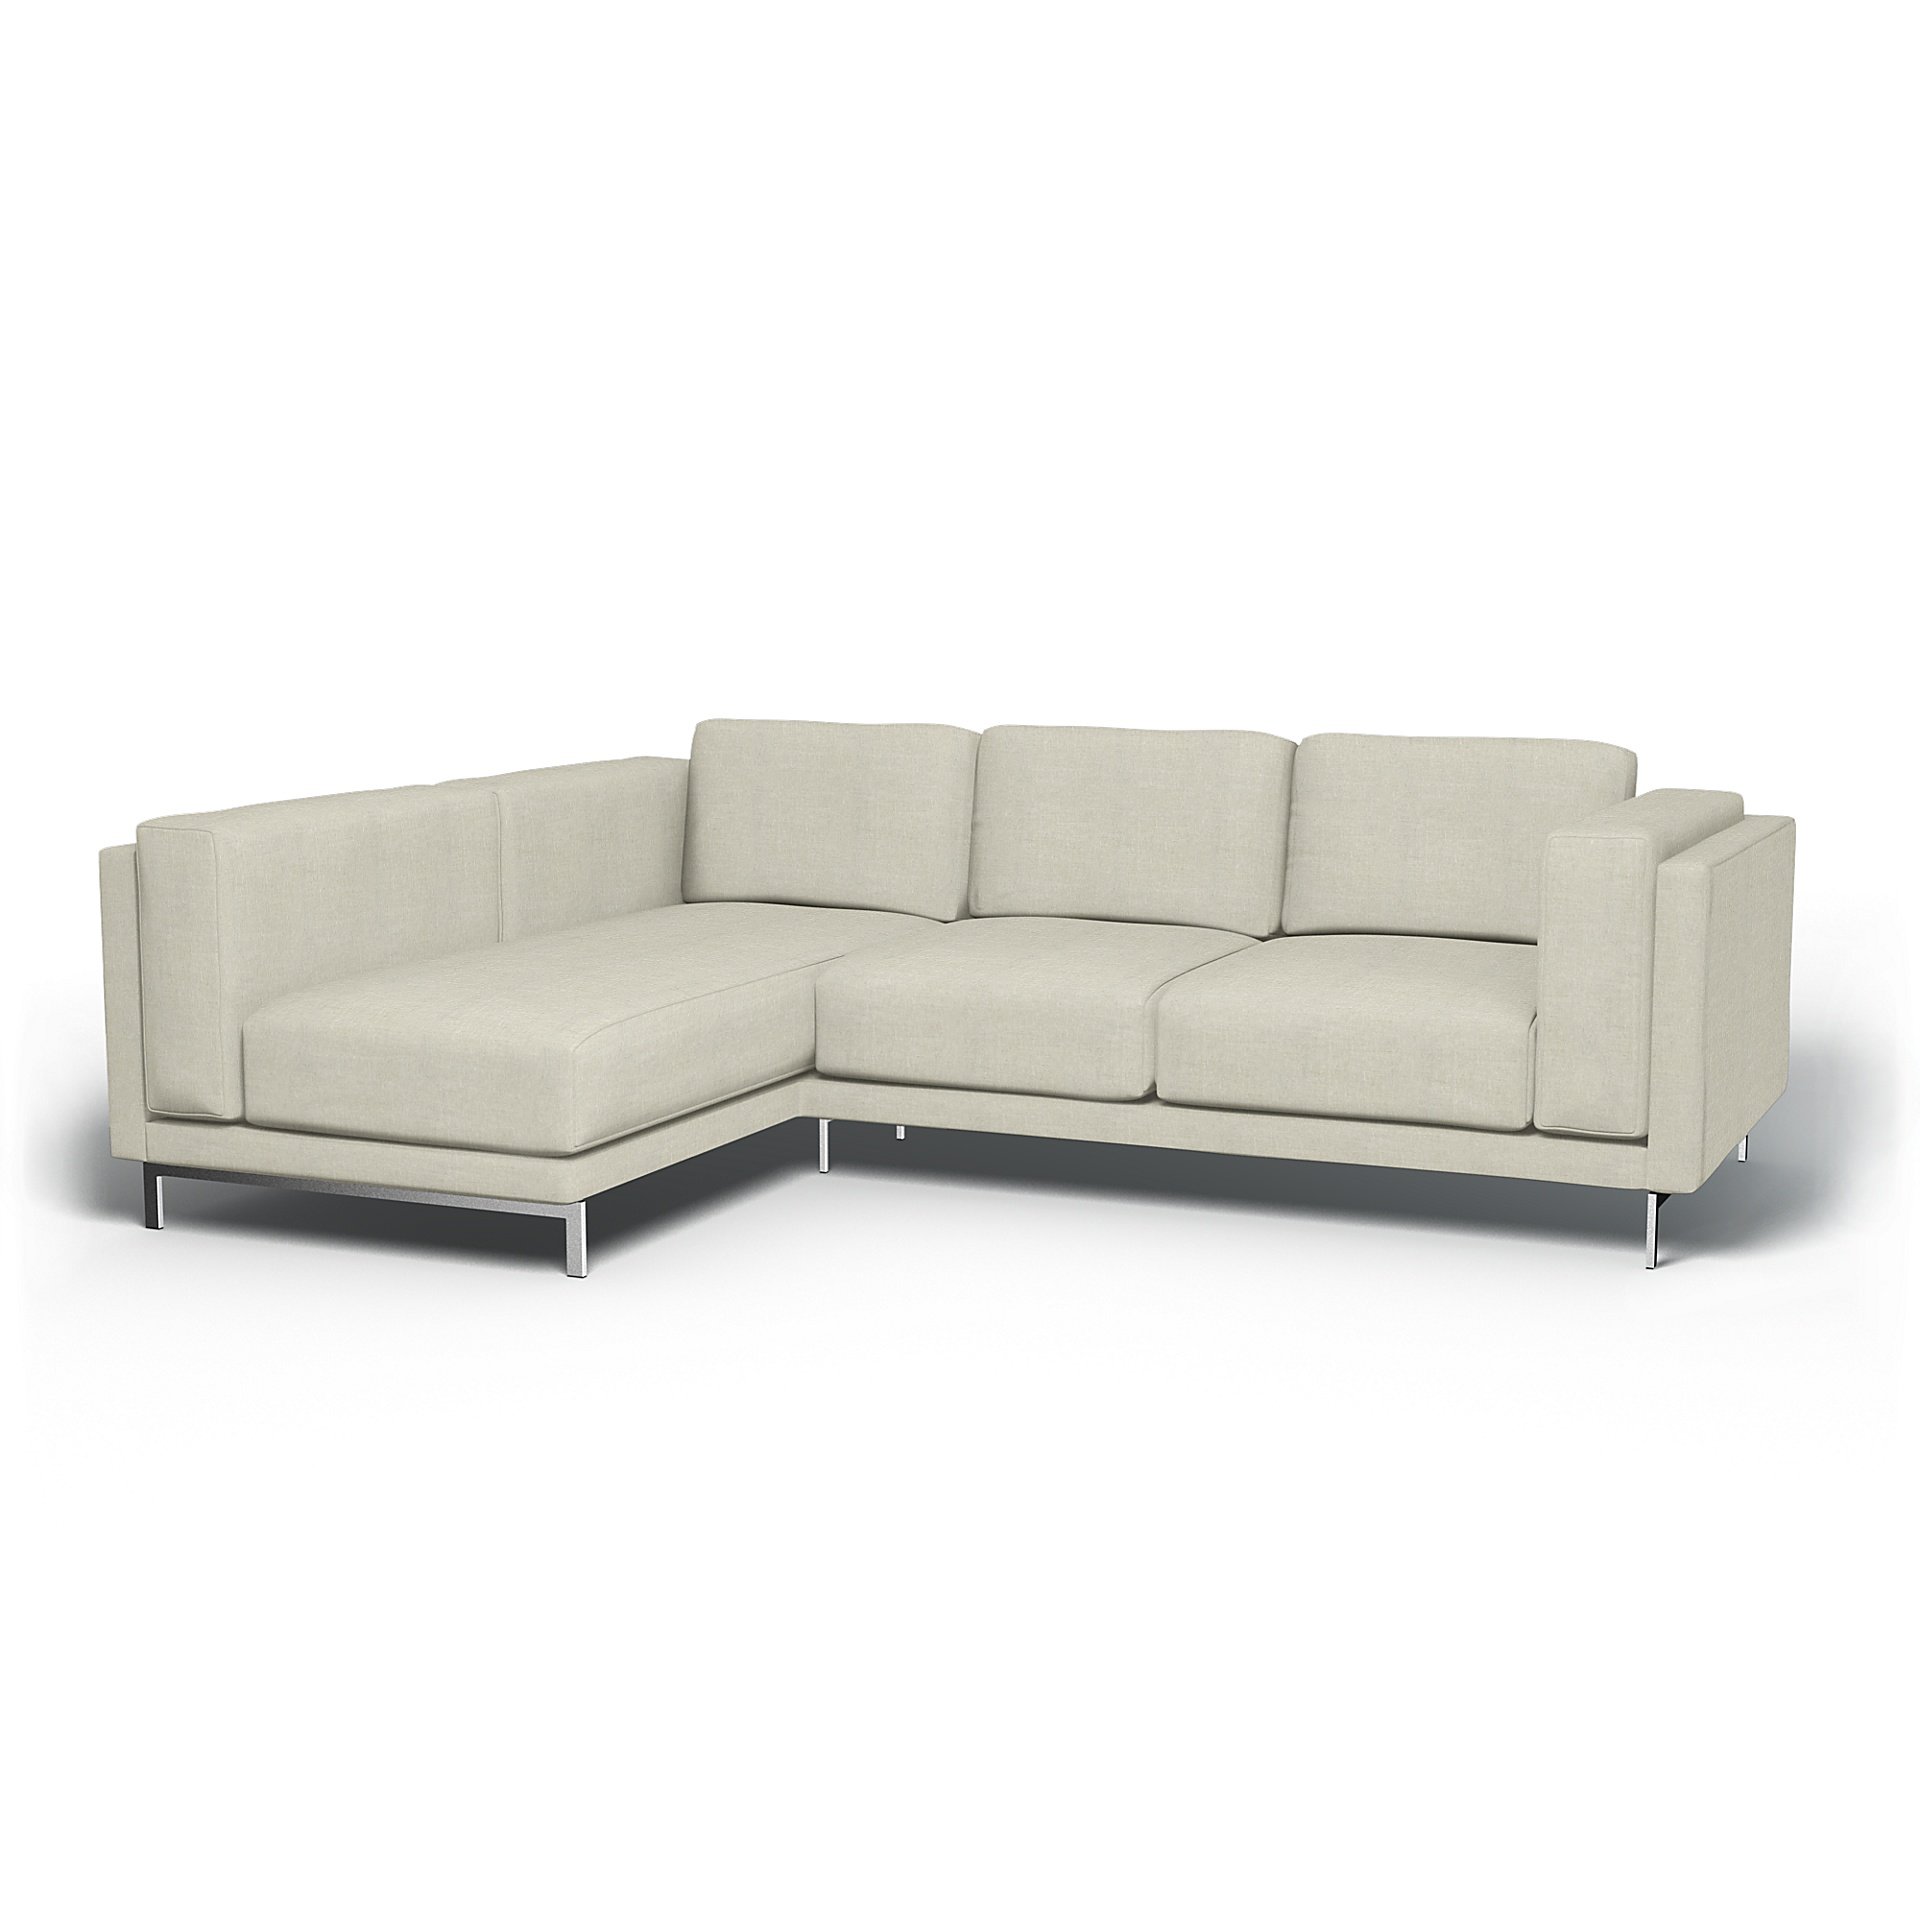 IKEA - Nockeby 3 Seater Sofa with Left Chaise Cover, Natural, Linen - Bemz